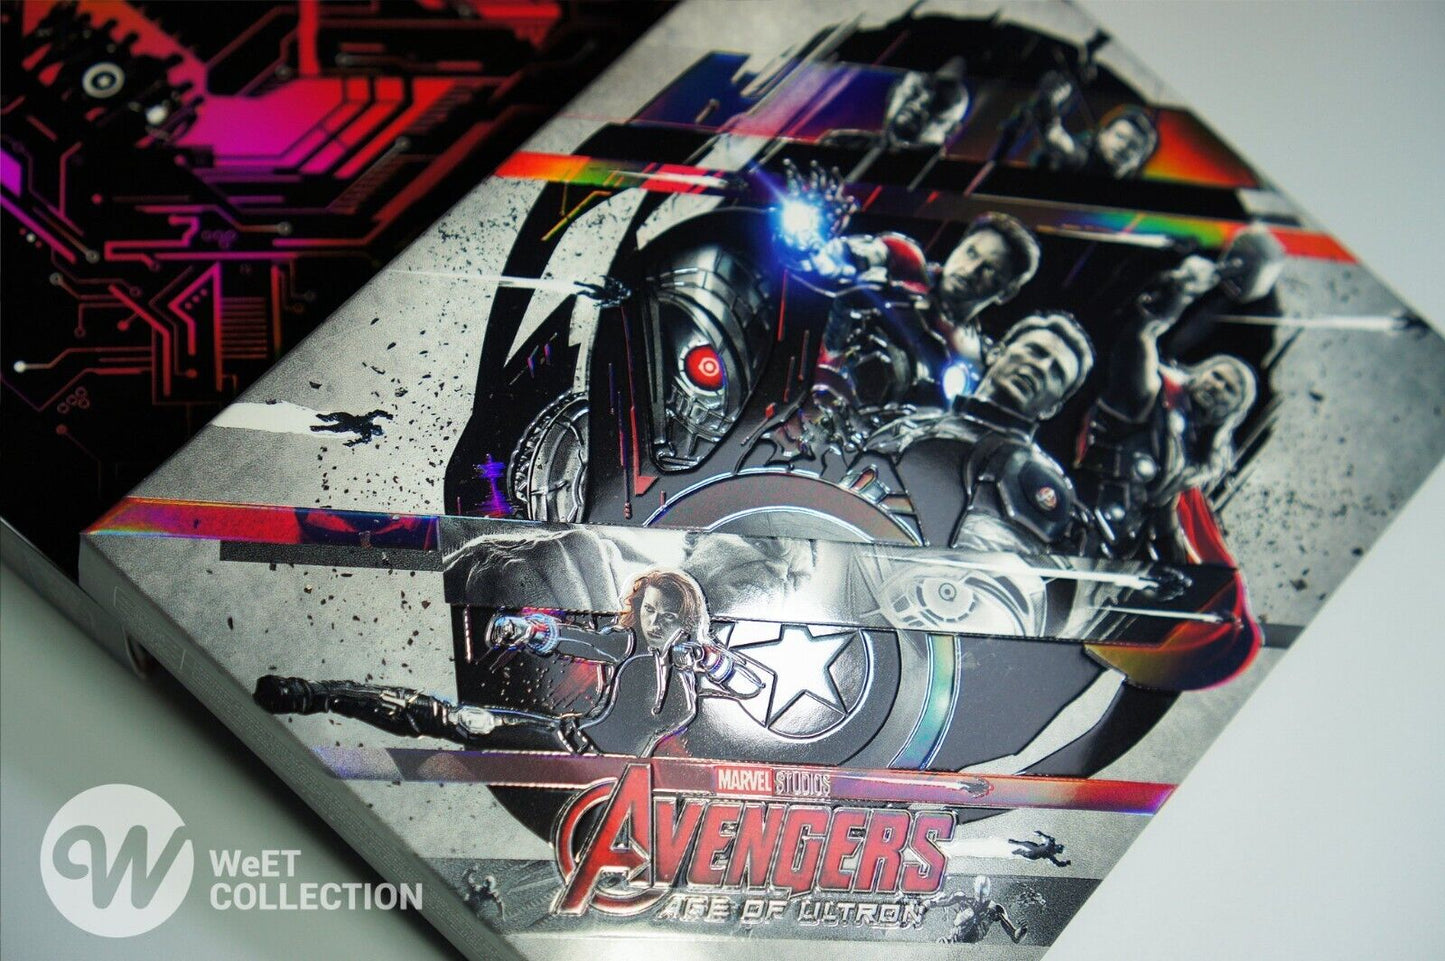 Avengers: Age of Ultron 4K+2D Blu-ray SteelBook WeET Collection Exclusive #15 Full Slip A2